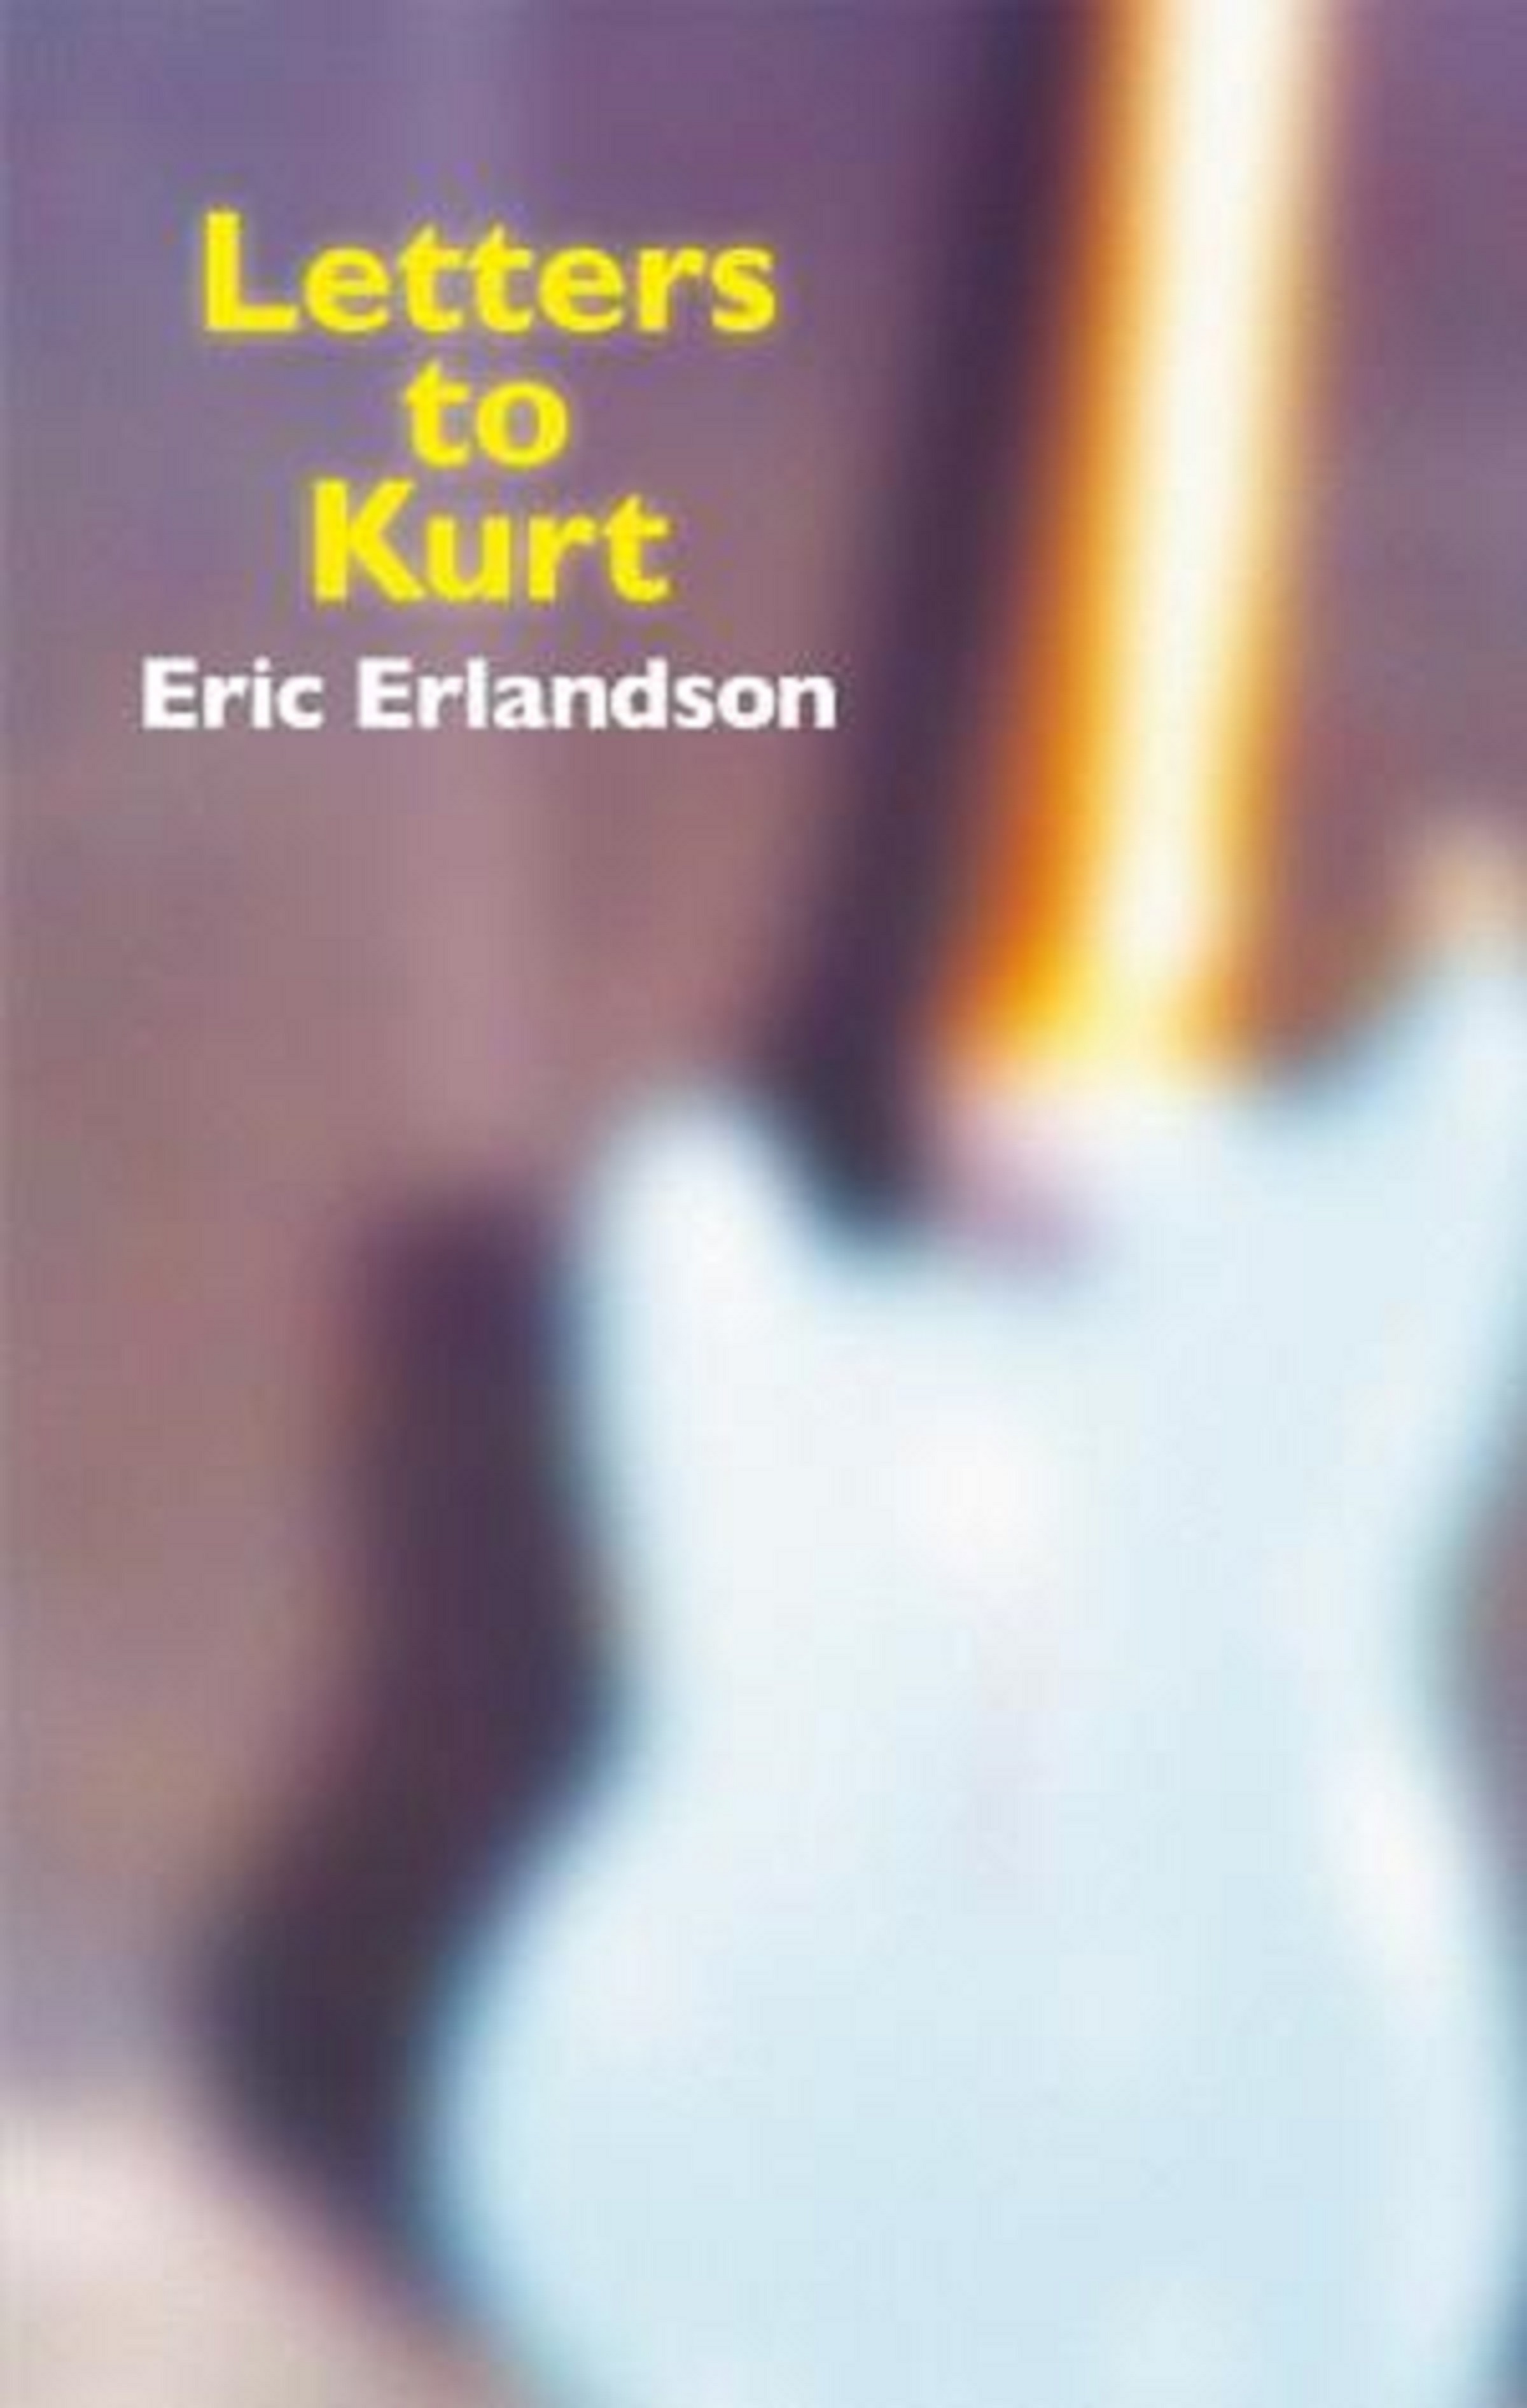 Letters to Kurt: Exploring Death, Media, Society & Finding Self